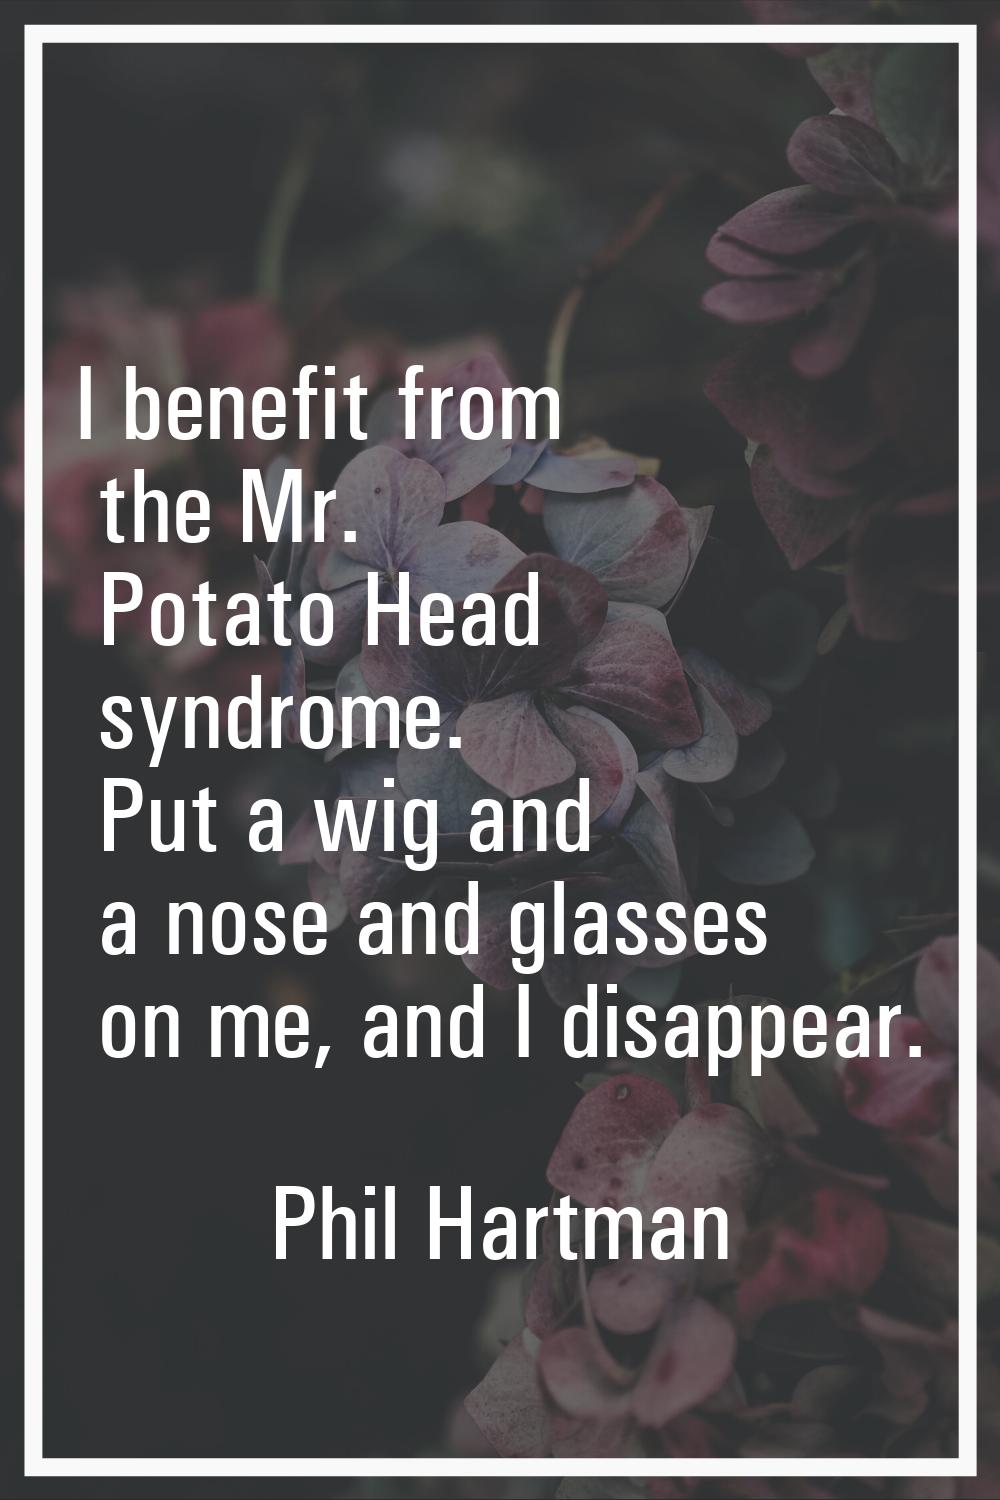 I benefit from the Mr. Potato Head syndrome. Put a wig and a nose and glasses on me, and I disappea